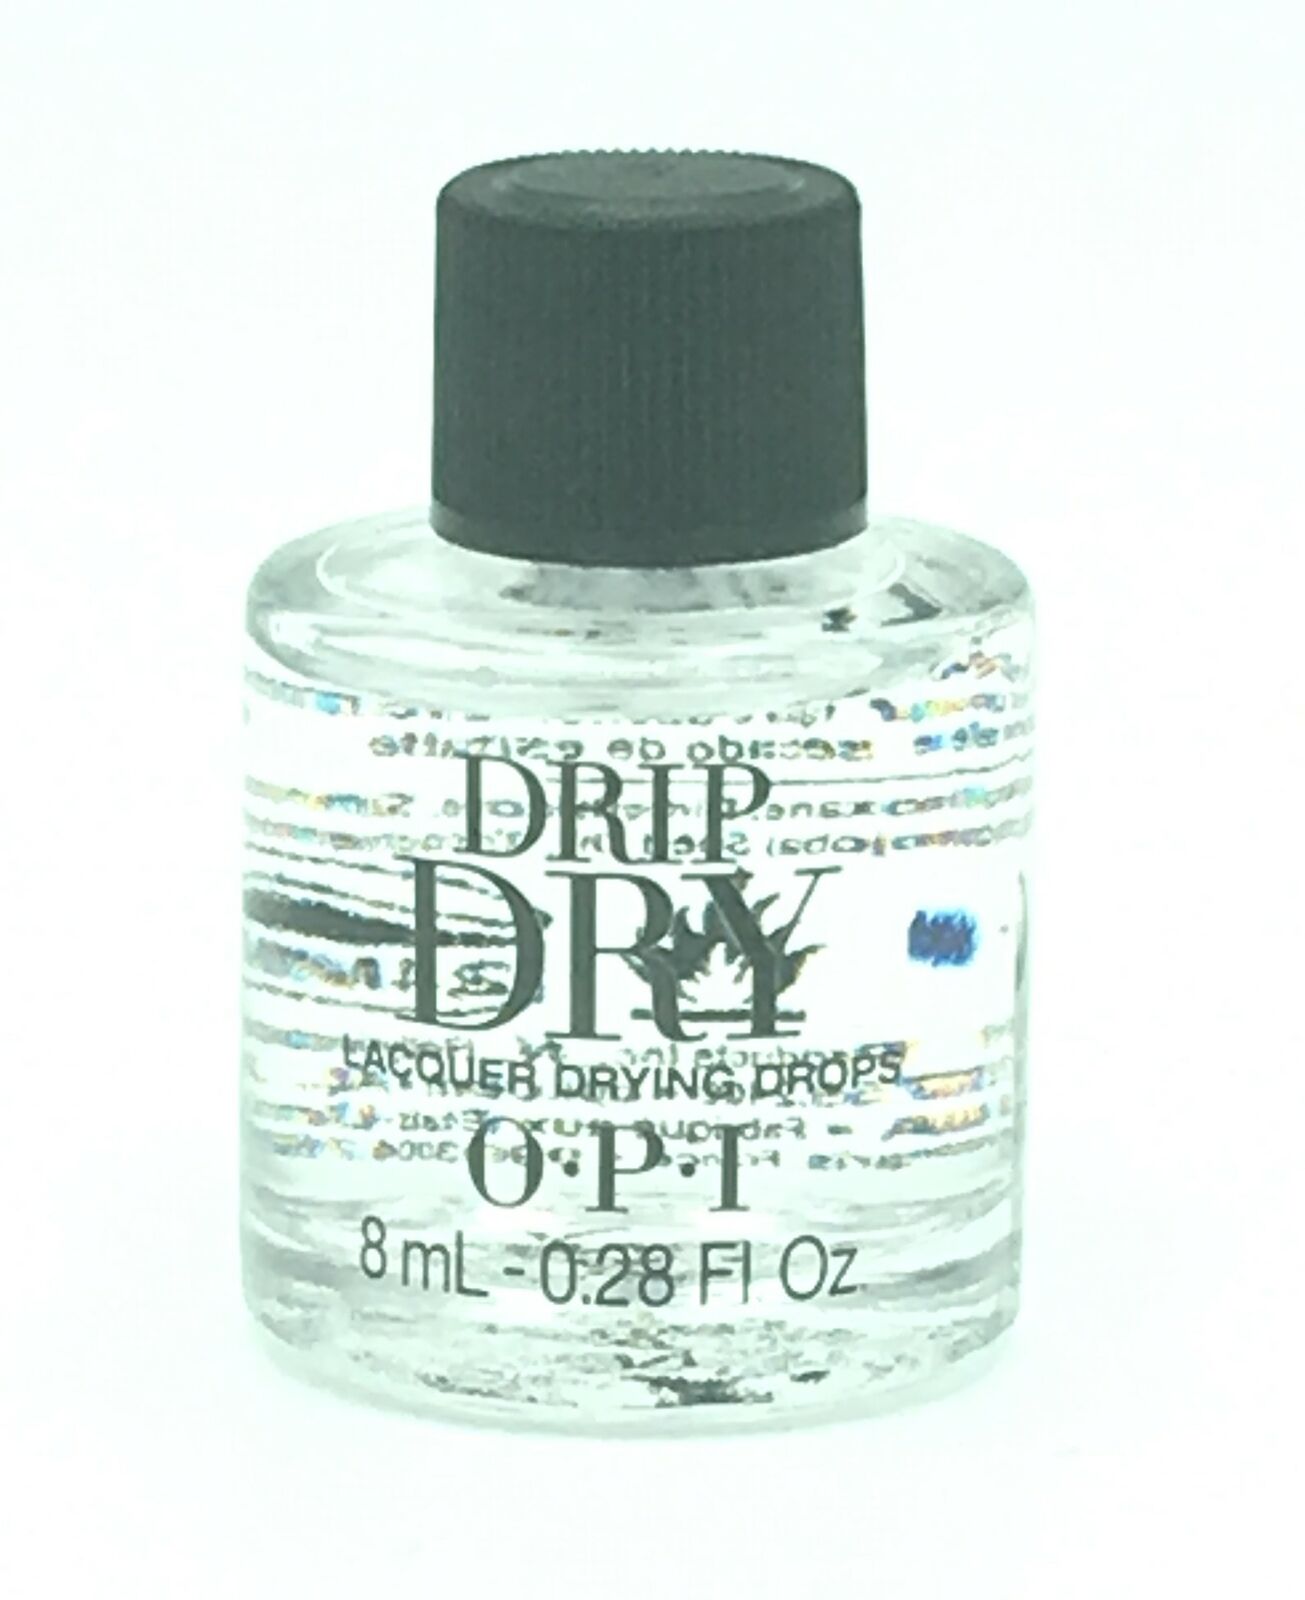 Lot Of 2 Opi Drip Dry Nail Polish Dryer Drops 0.28oz - Unboxed Bottles